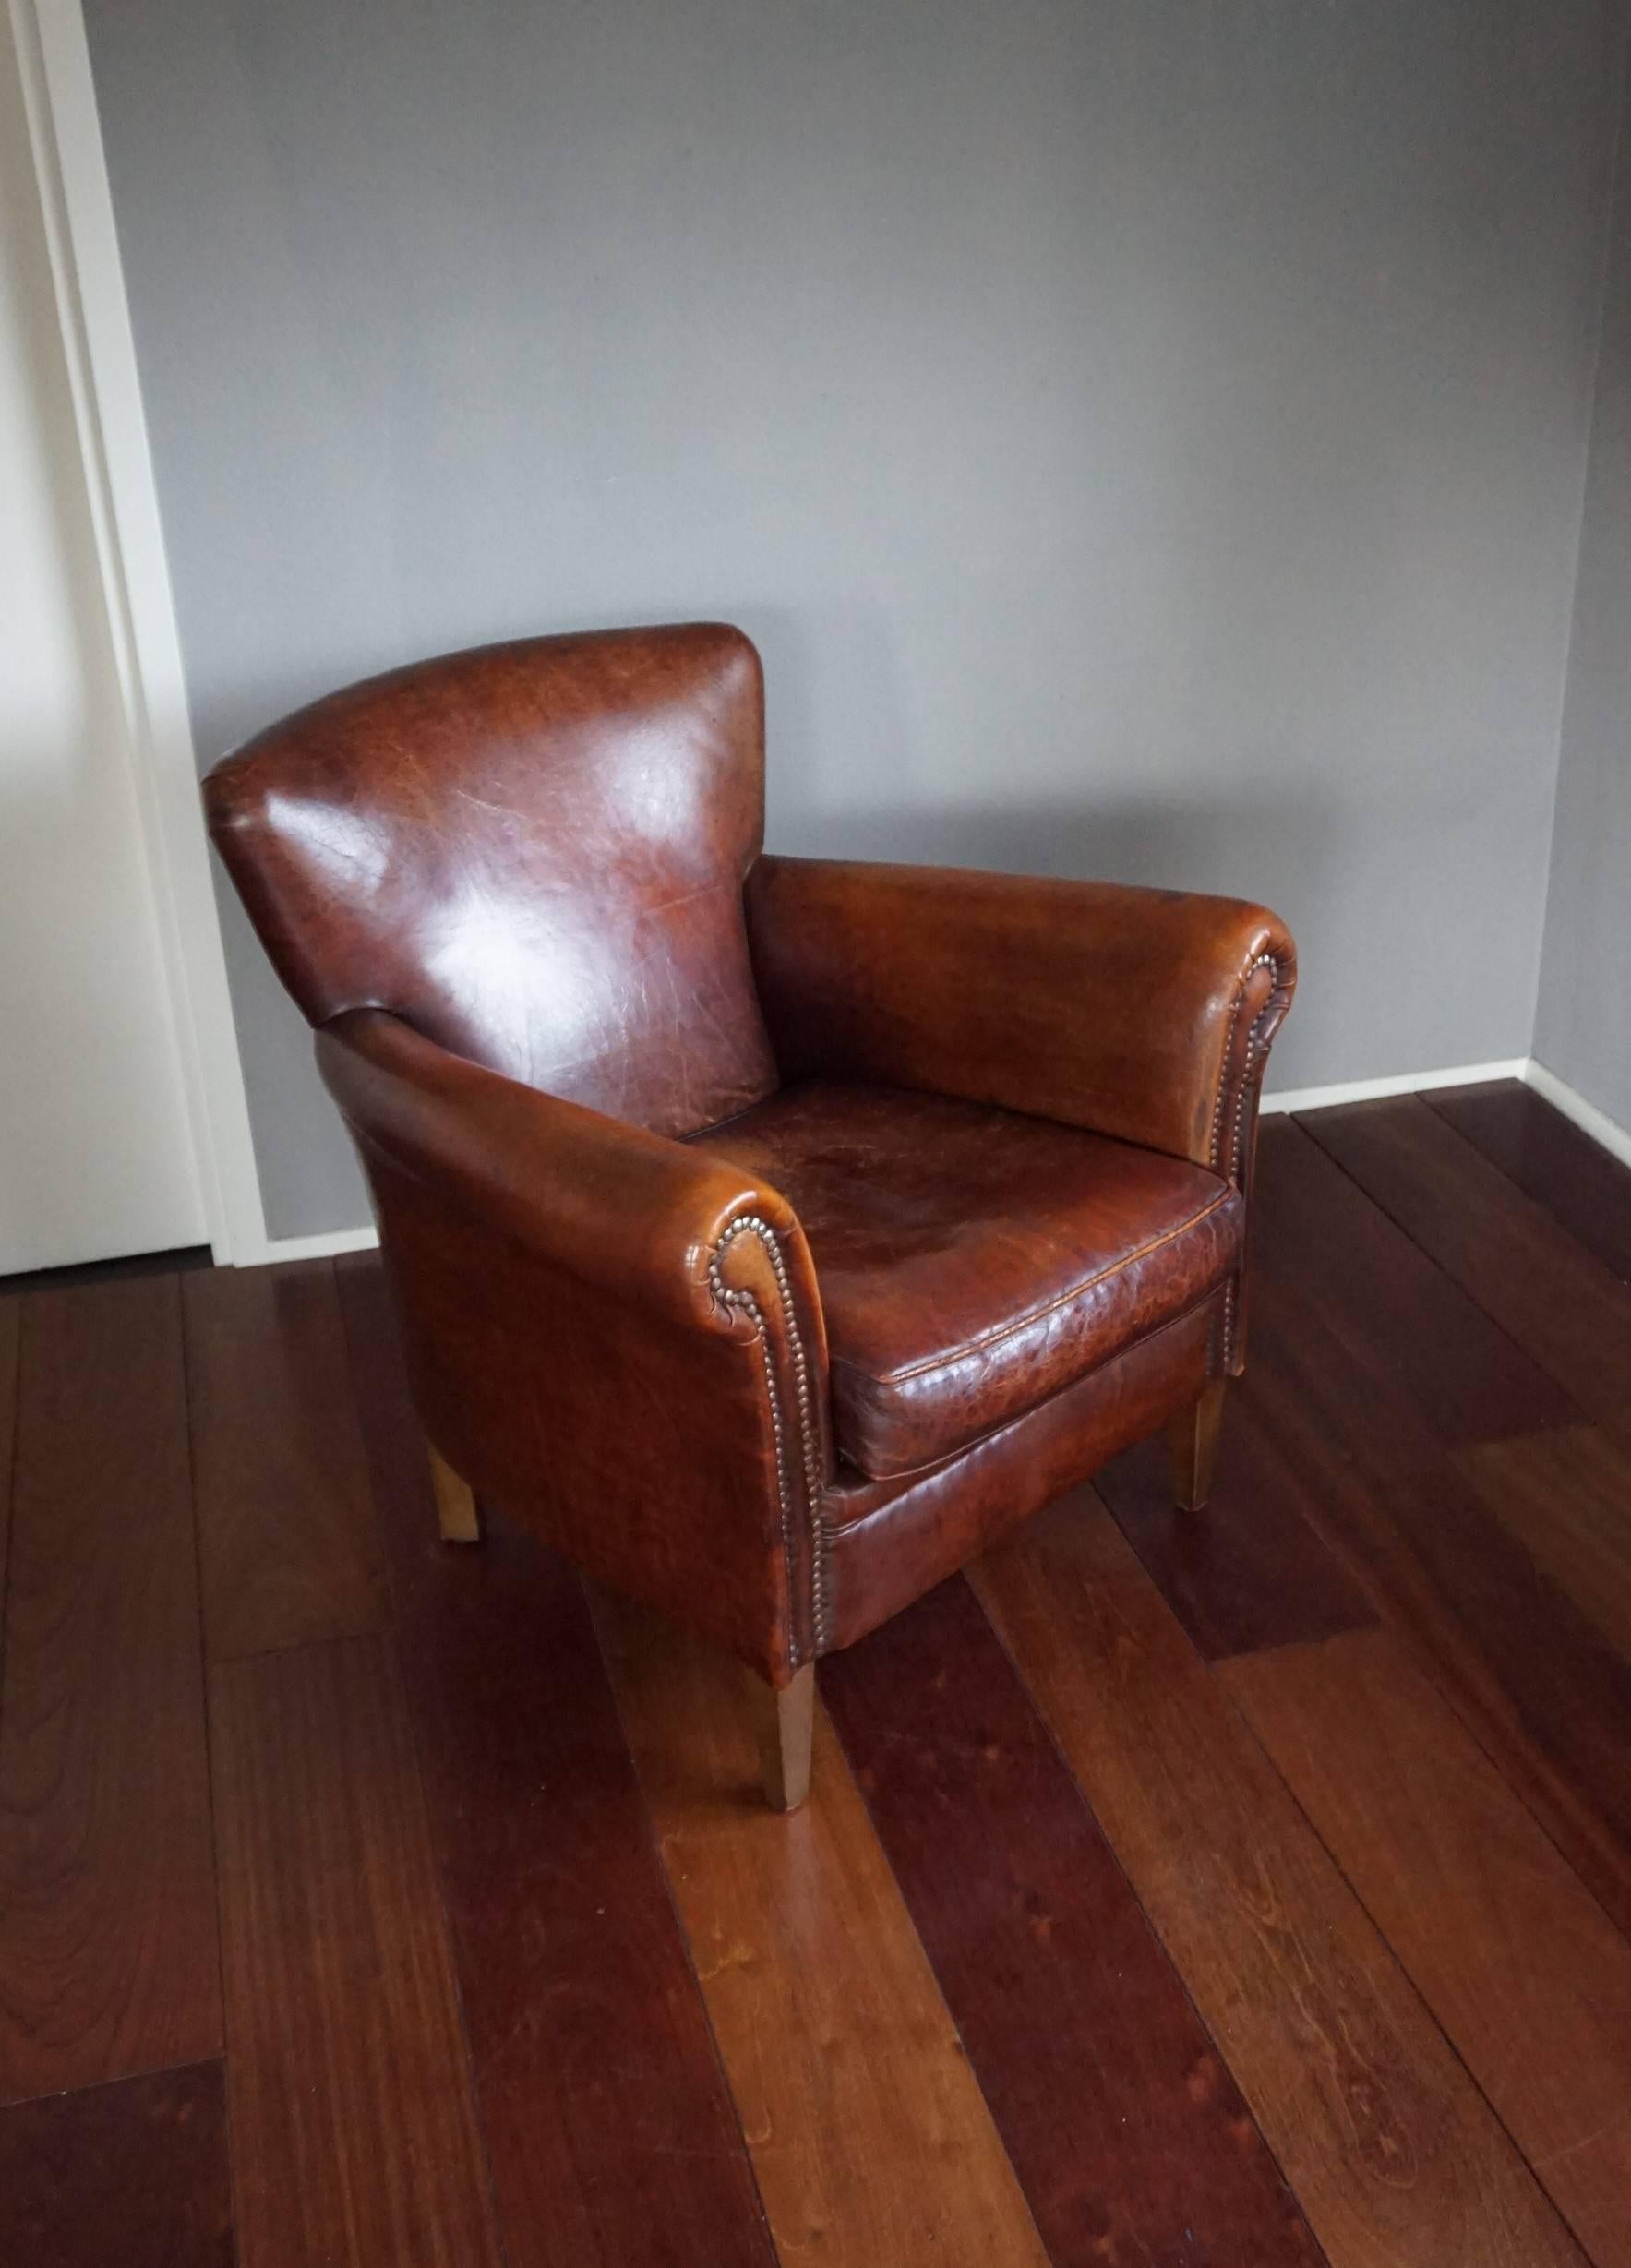 Patinated Great Quality and Condition Sheep Leather & Wood Chair Armchair with Warm Patina